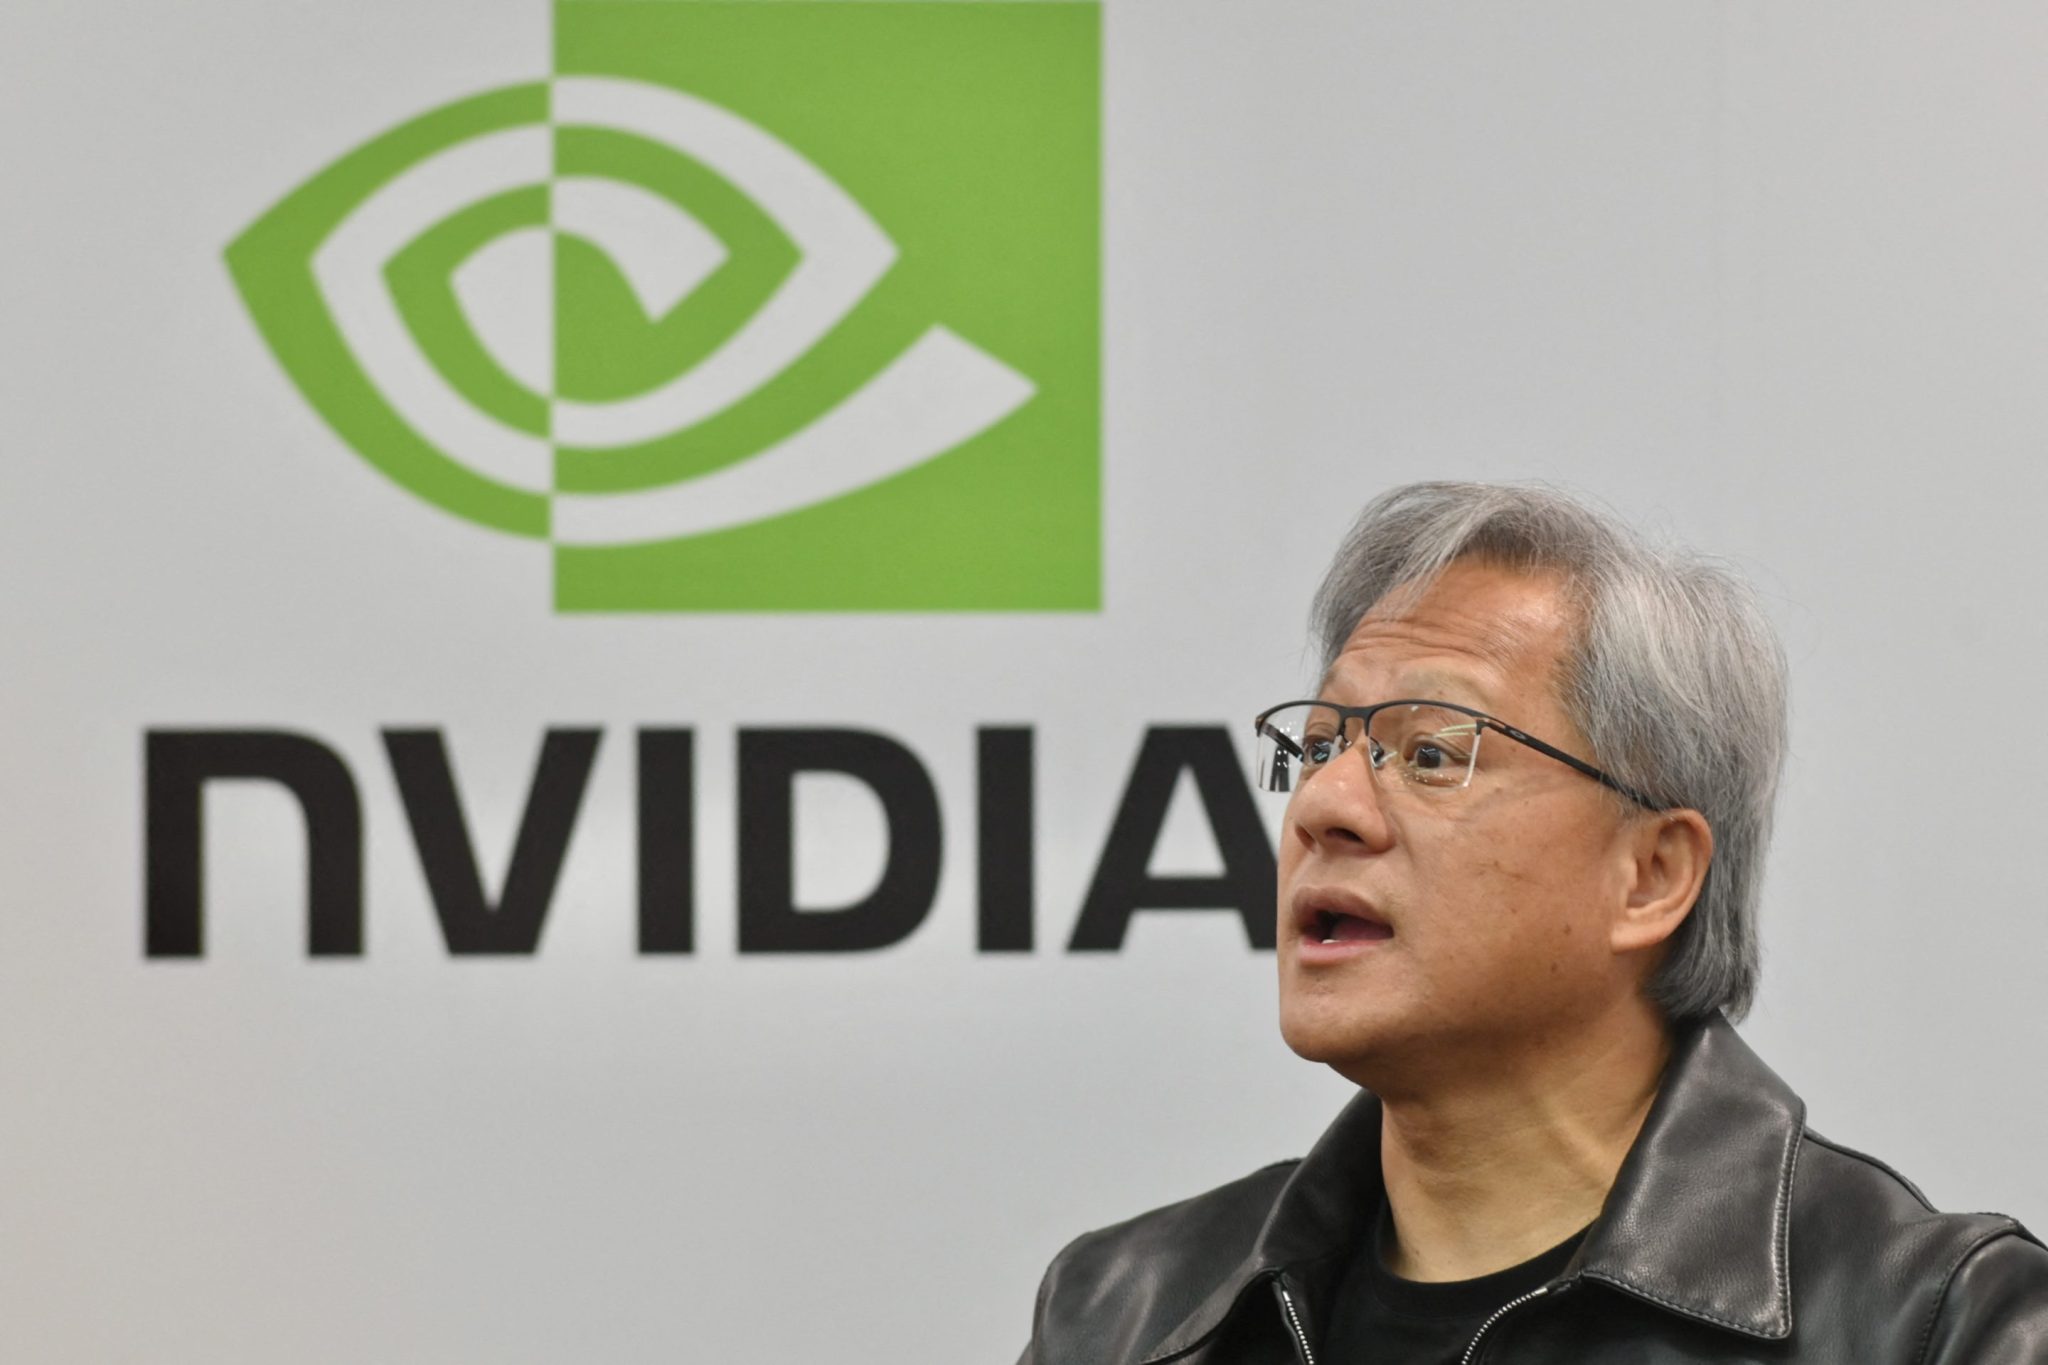 amazon, microsoft, $1.7 trillion chip giant nvidia just gained over $100 billion in value after a blowout quarter, but this mega-bearish analyst says the tech industry is in an ai bubble